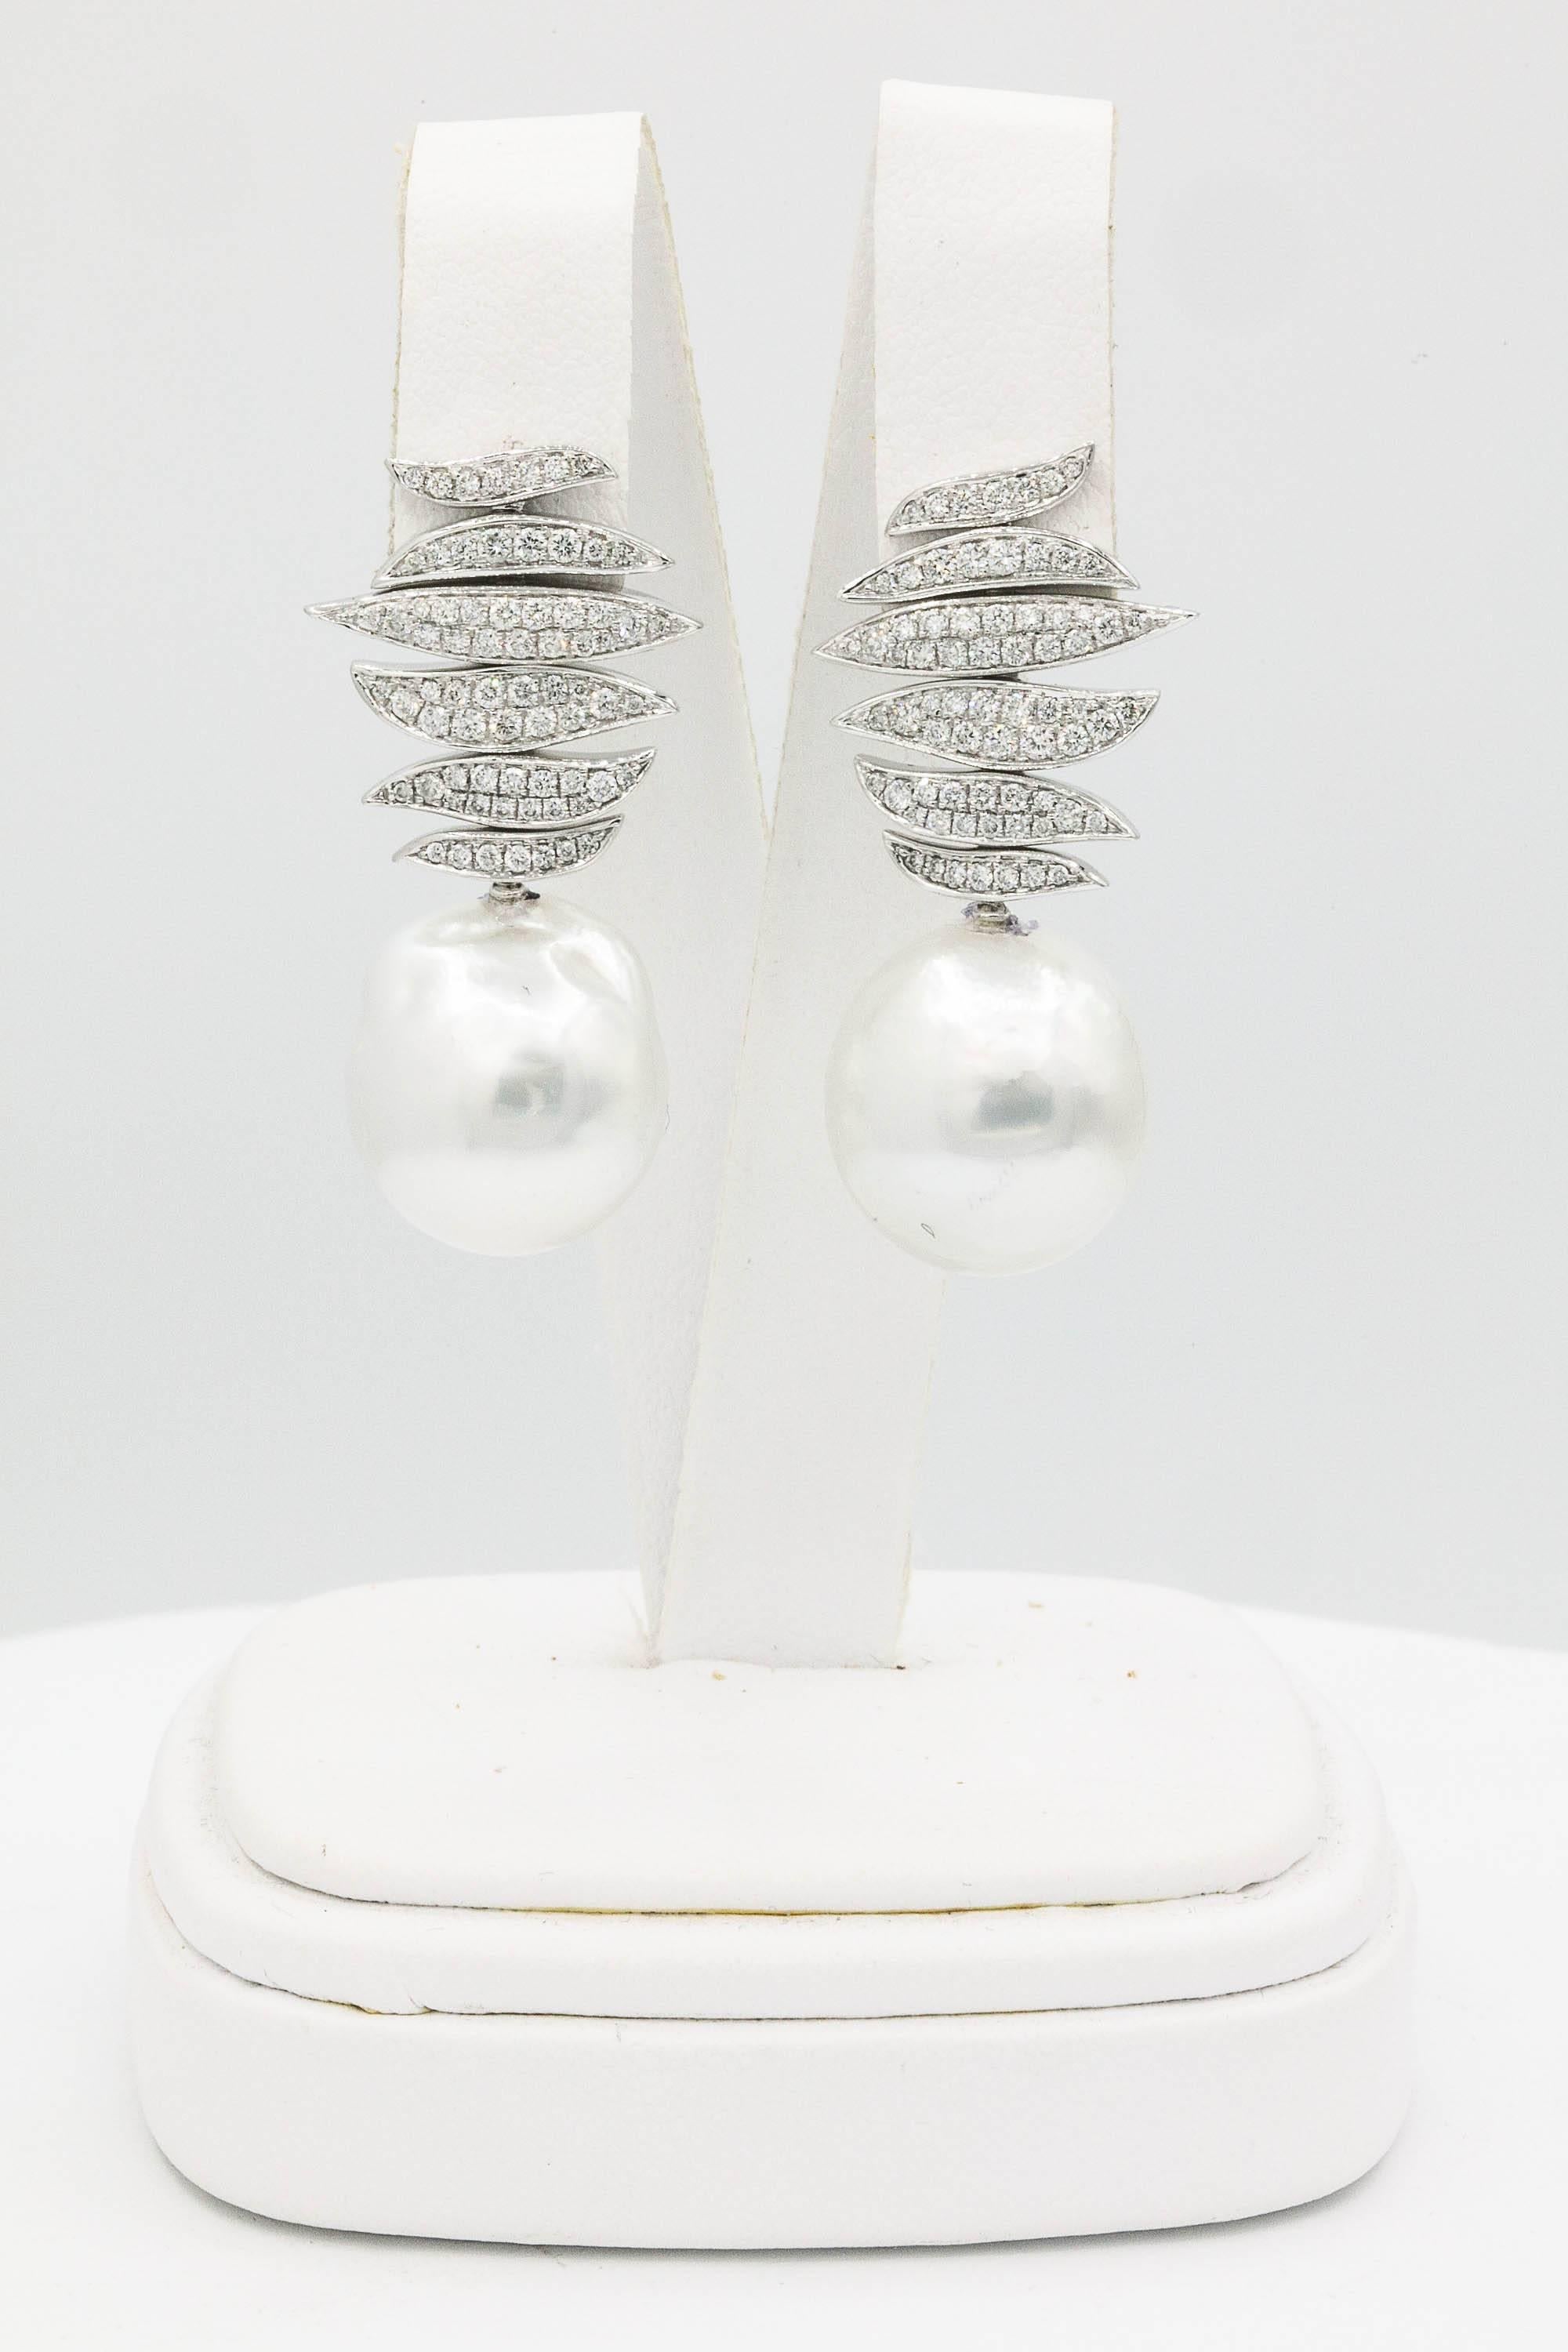 Contemporary South Sea Baroque Pearl Diamond Drop Earrings 0.96 Carats 18K For Sale